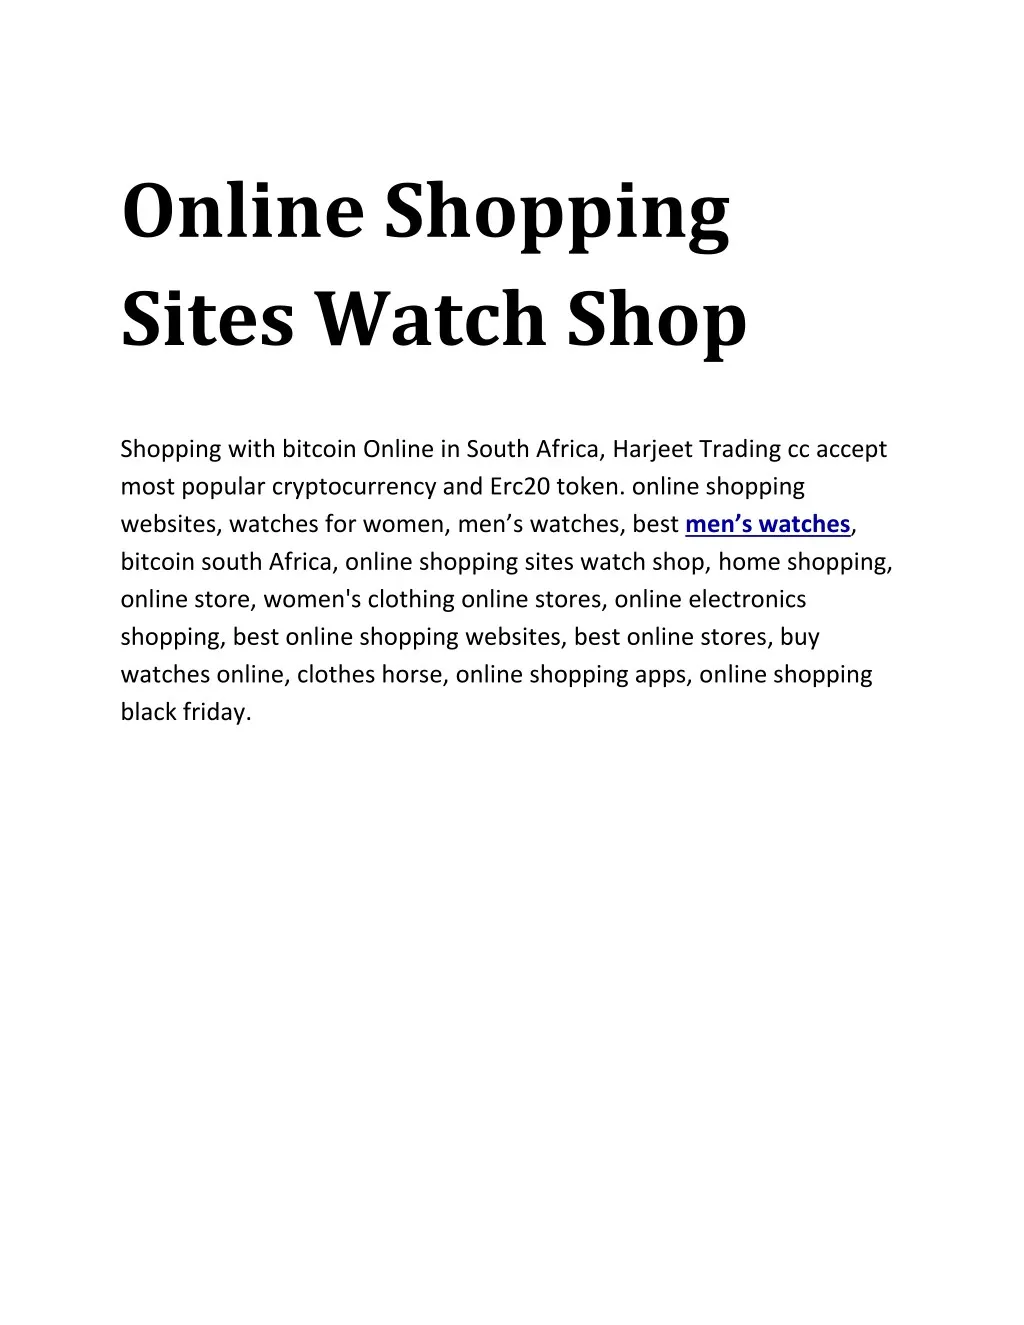 online shopping sites watch shop